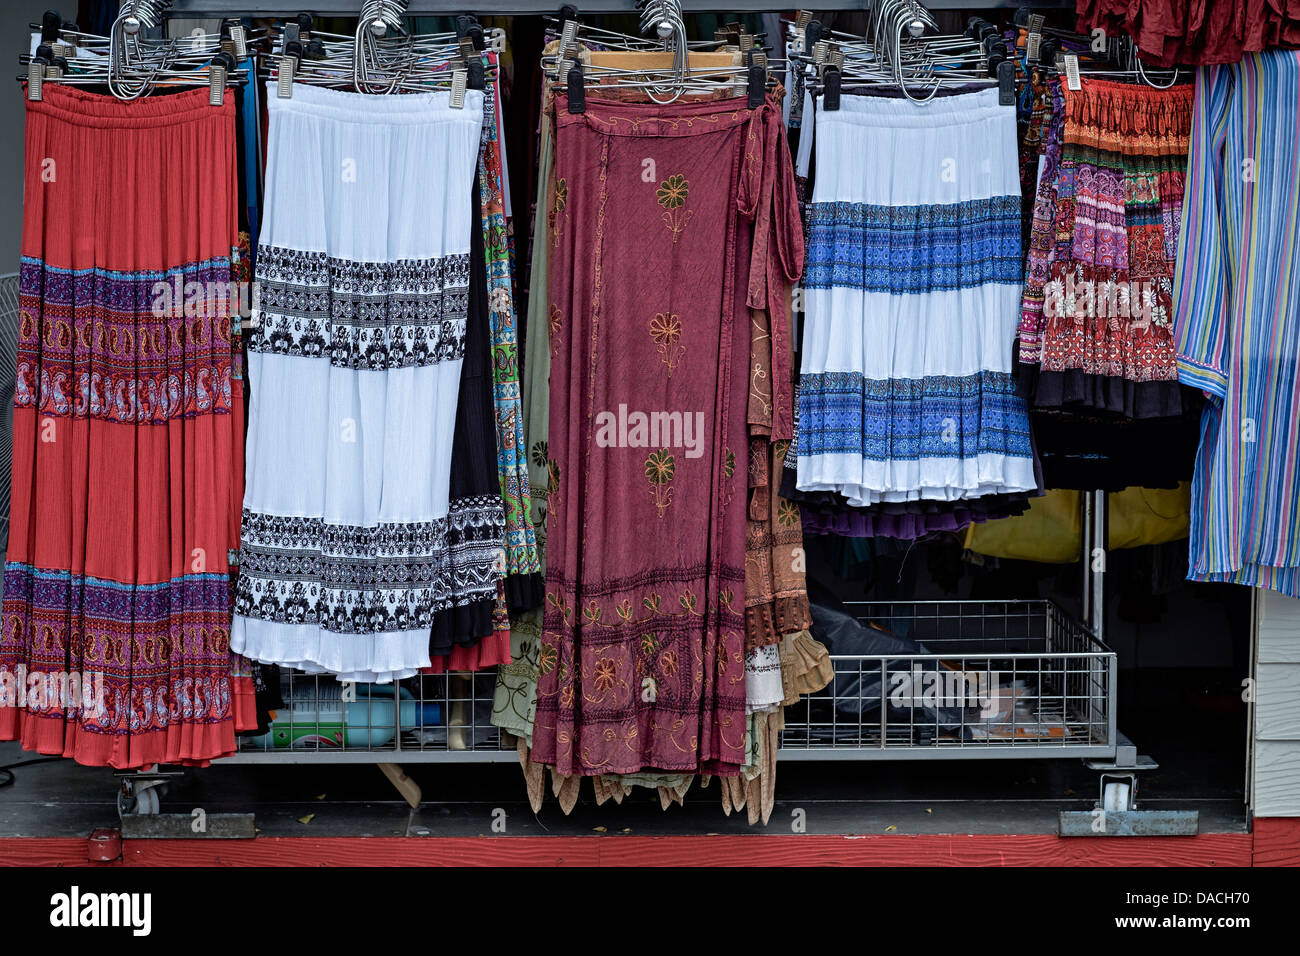 Colourful clothing. Shop display of brightly colored woman's skirts and casual dress. Thailand S. E. Asia Stock Photo